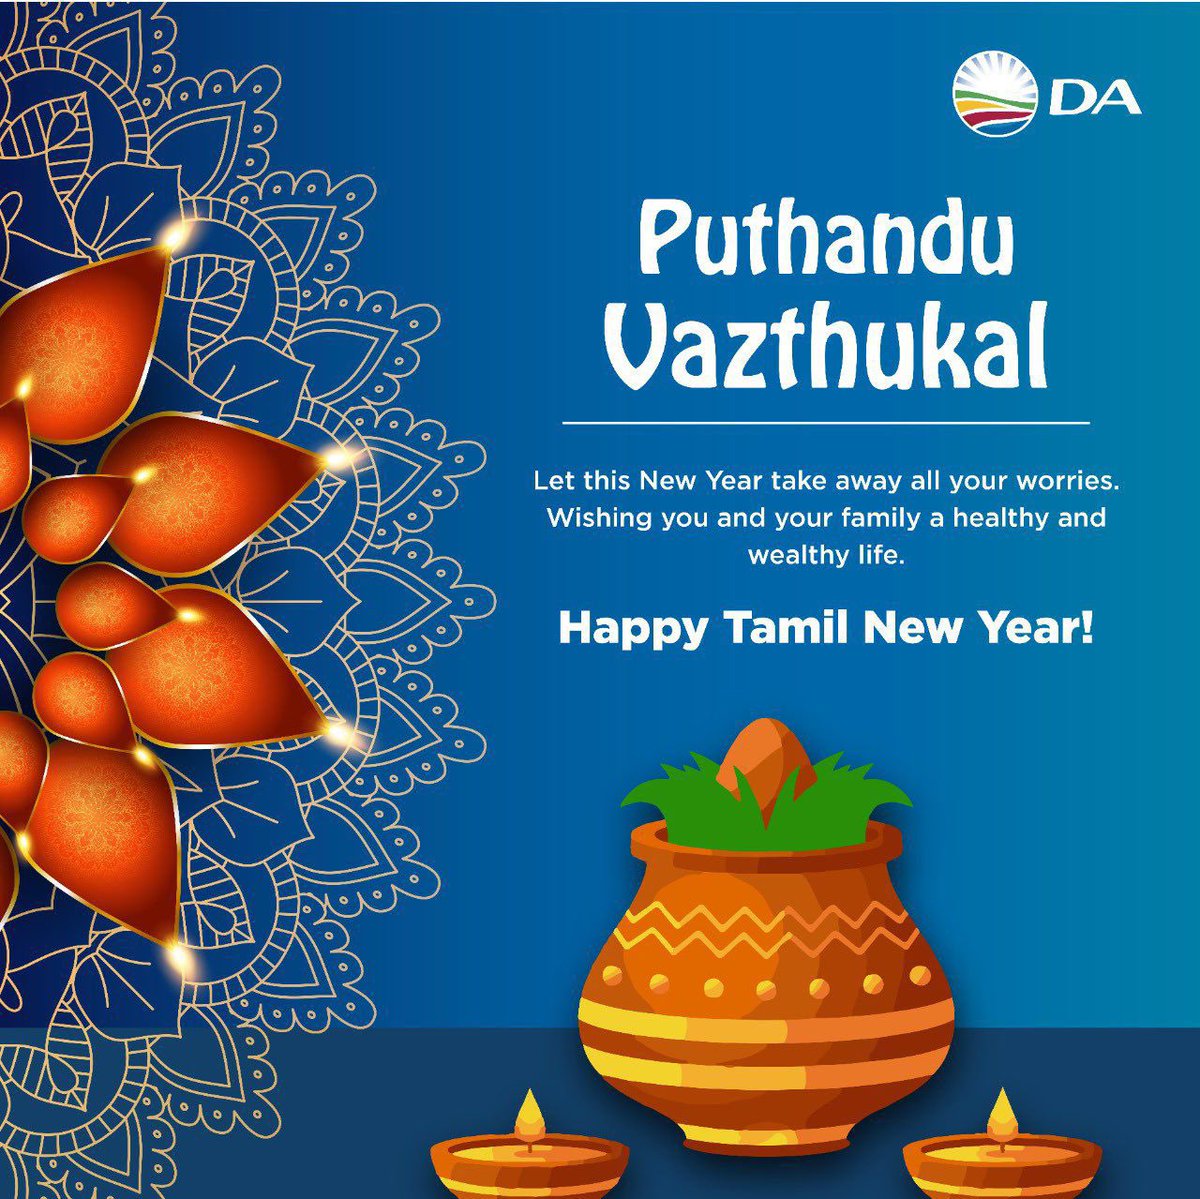 🪔| The DA in KwaZulu-Natal wishes our Tamil community a happy new year. We wish abundant blessings to all celebrating and marking this fresh start. Happy Puthandu!